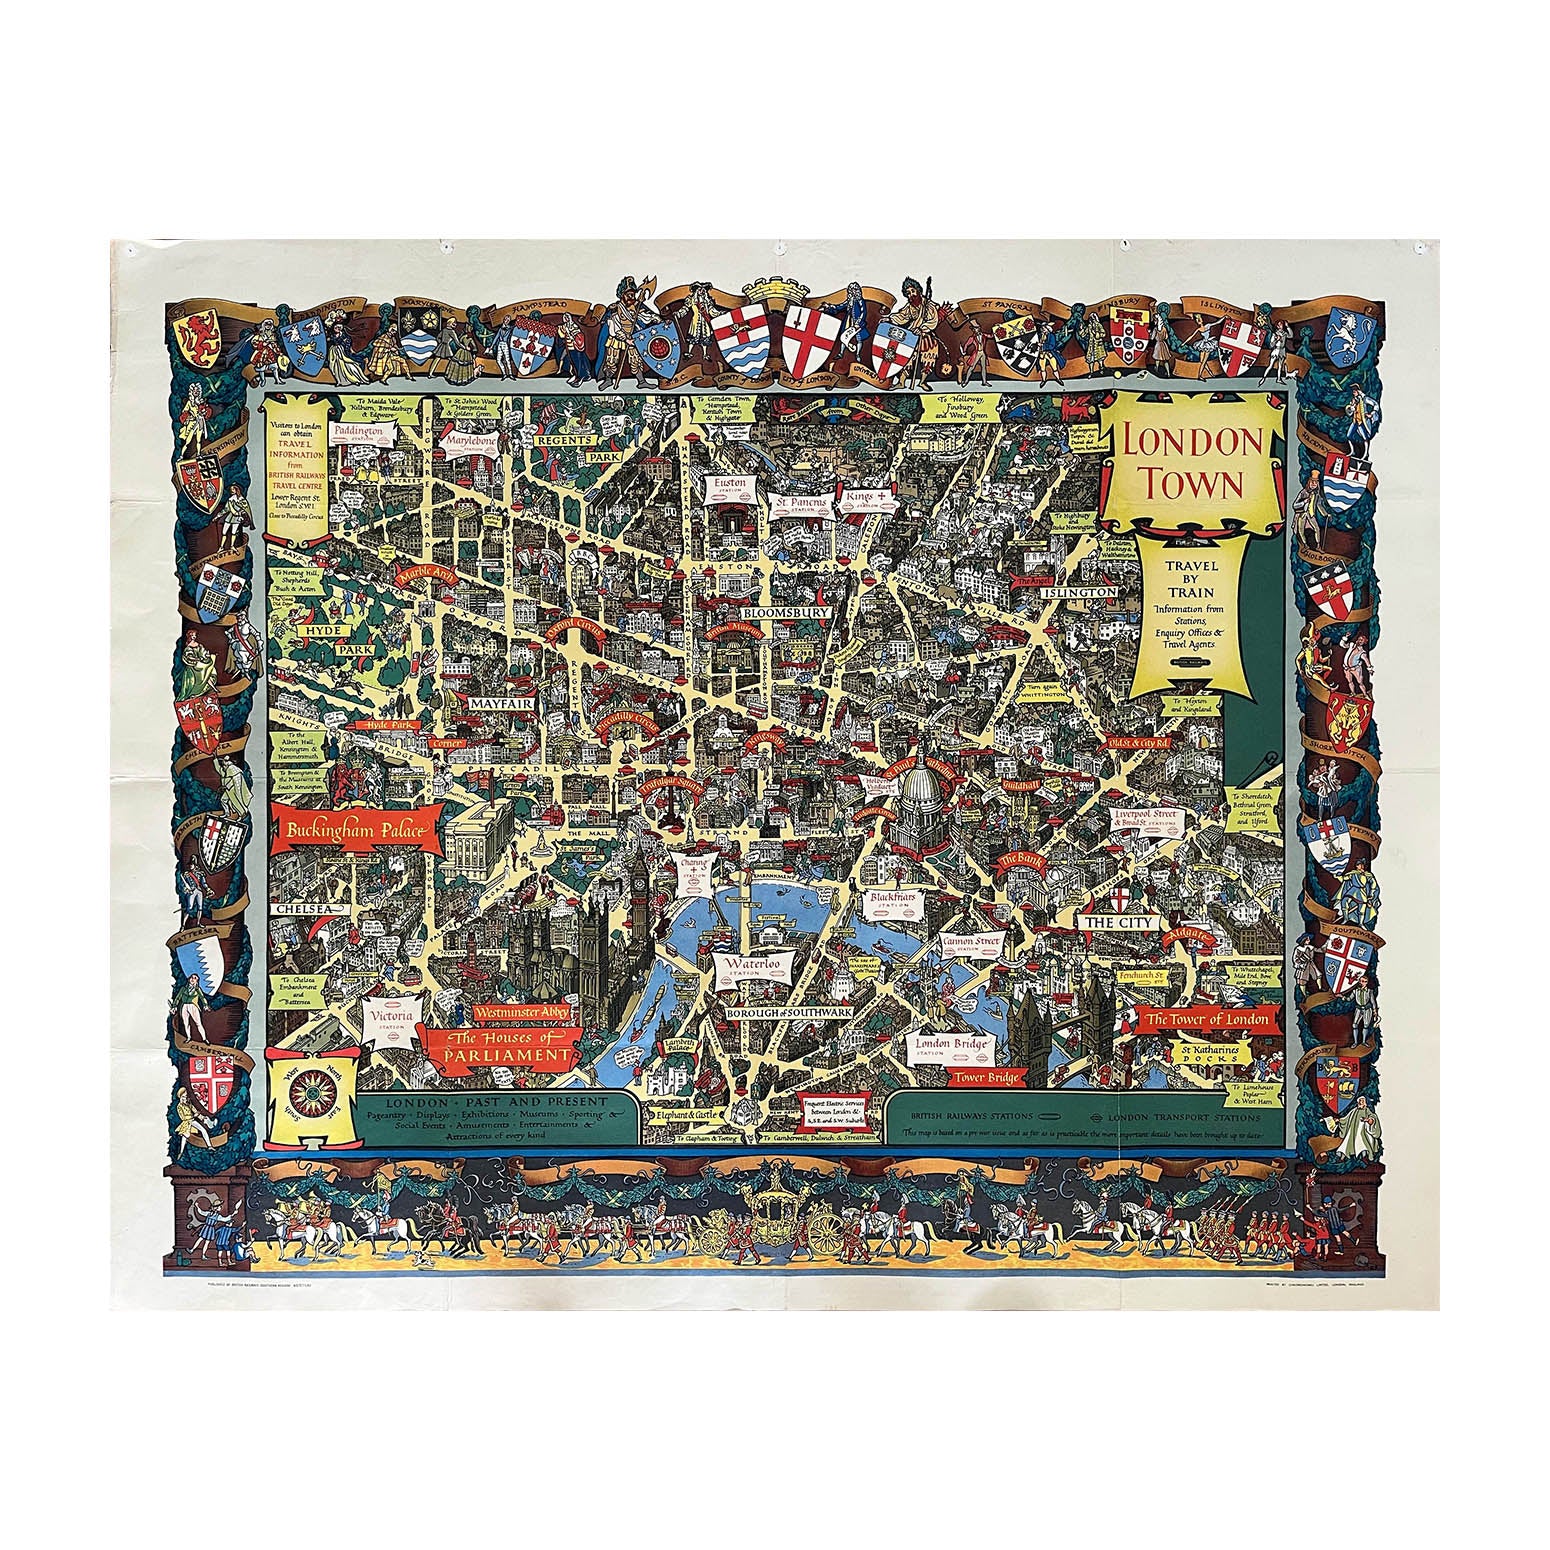 Original pictorial railway poster map of central London designed by Kerry Lee 1953. Full of period detail, prominent landmarks and humorous scenes. It also includes an illustration of the artist at work towards the bottom right corner of the map. The decorative border features historical figures from all the London boroughs with shields showing the coats of arms of each, while the royal procession for the State Opening of Parliament is prominent at the base